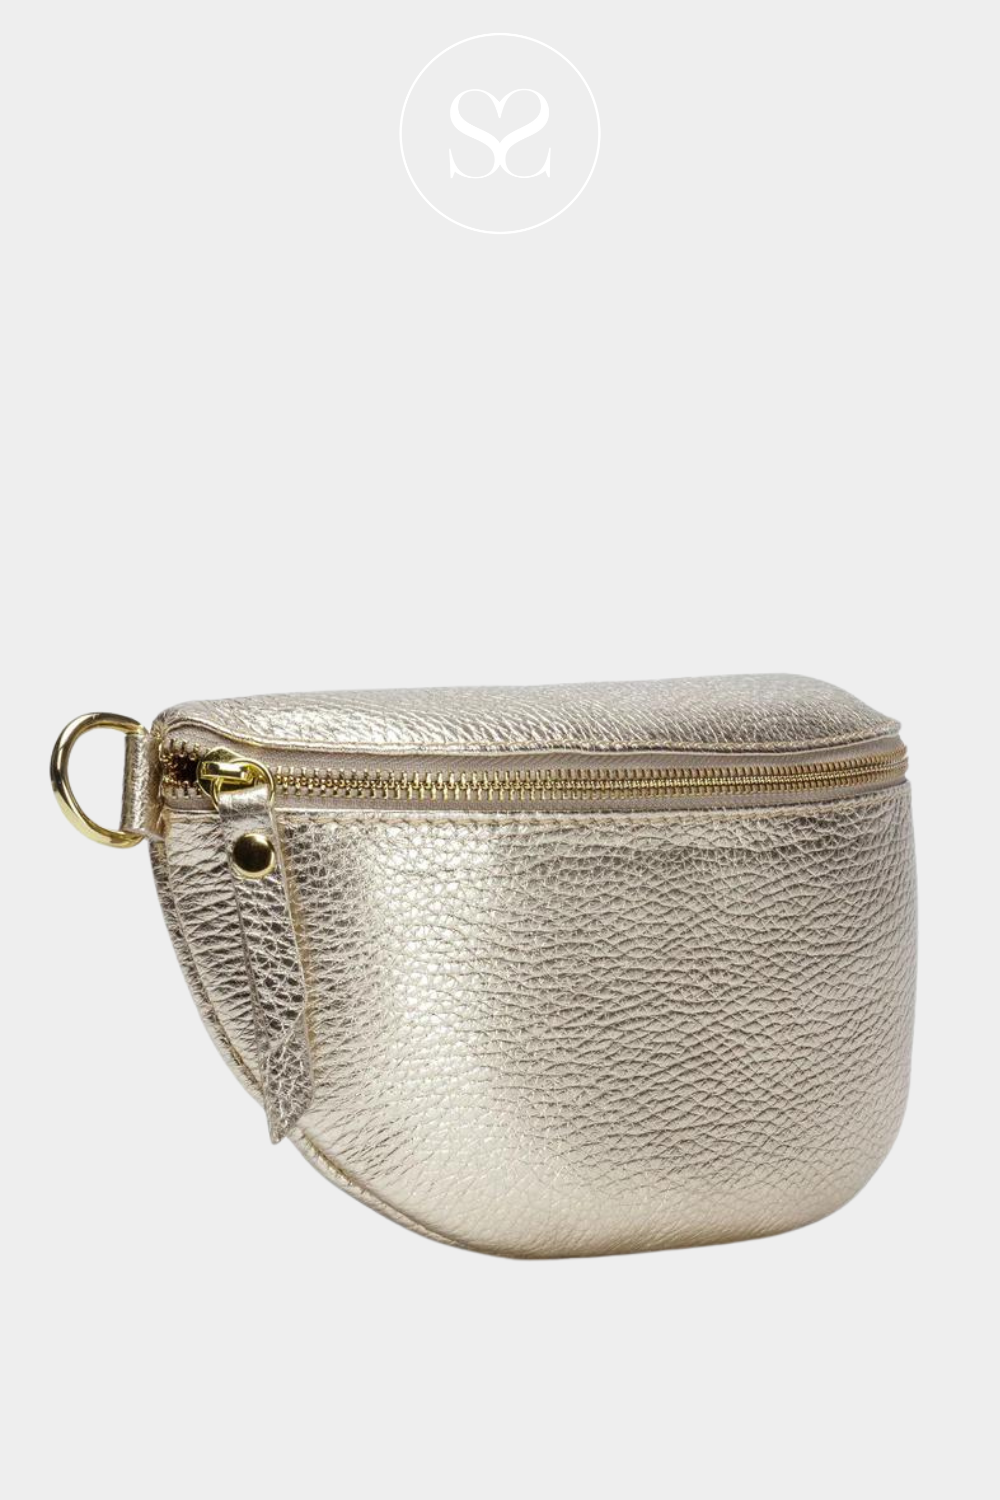 gold leather sling bag from Elie Beaumont Ireland